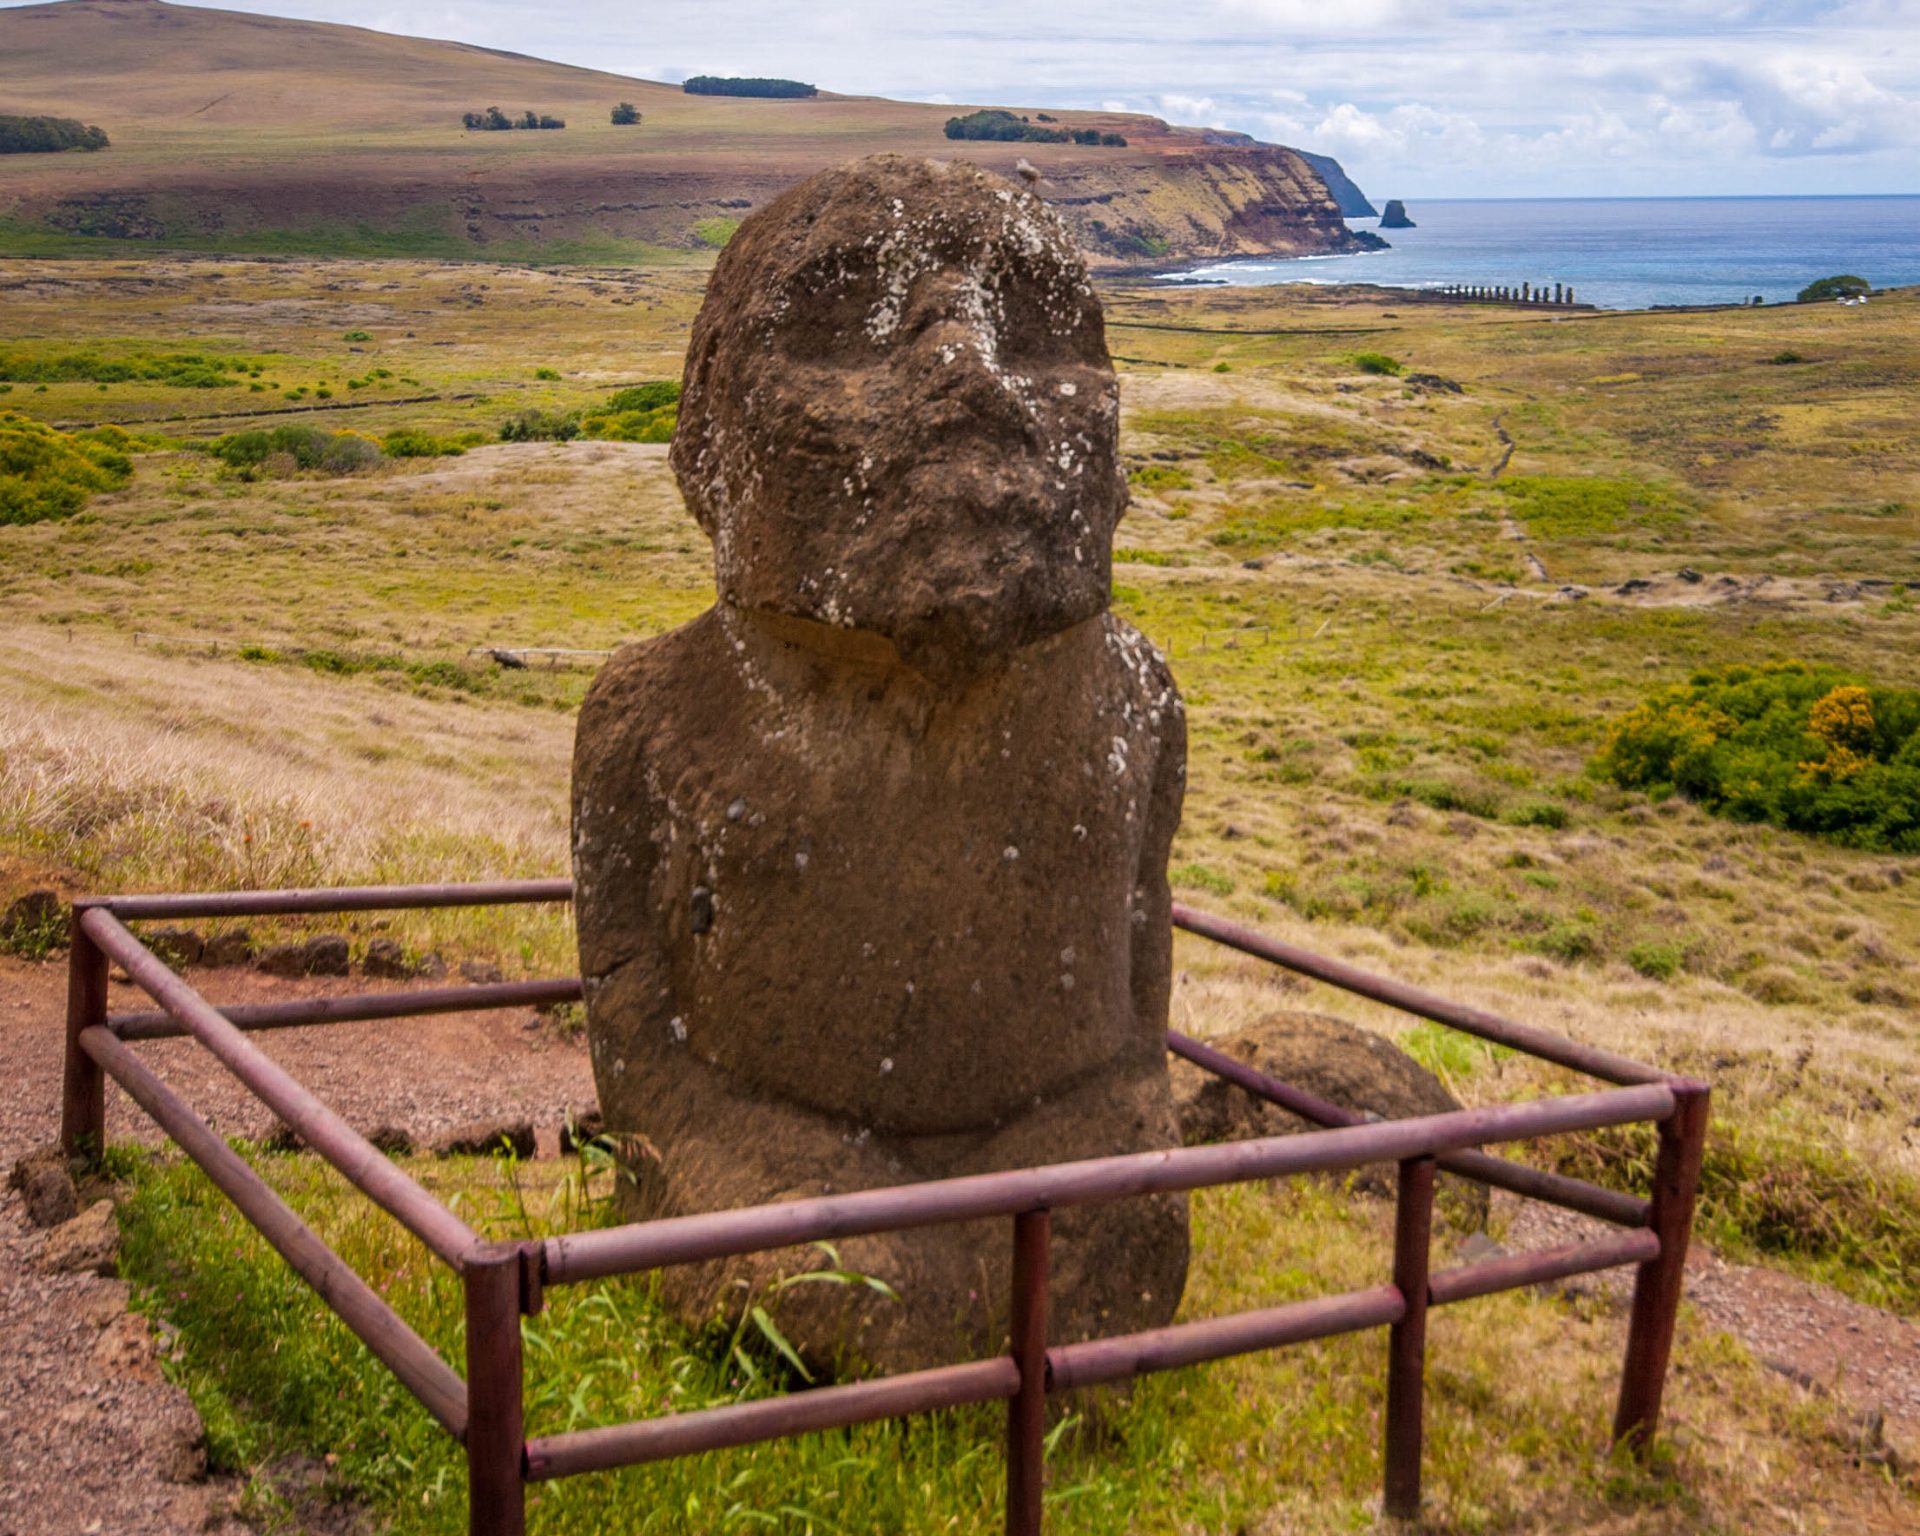 A unique moai sits in a fenced off area on a mountainside. The moai is kneeling and has a beard. In the background an ahu with 15 moai can be seen.